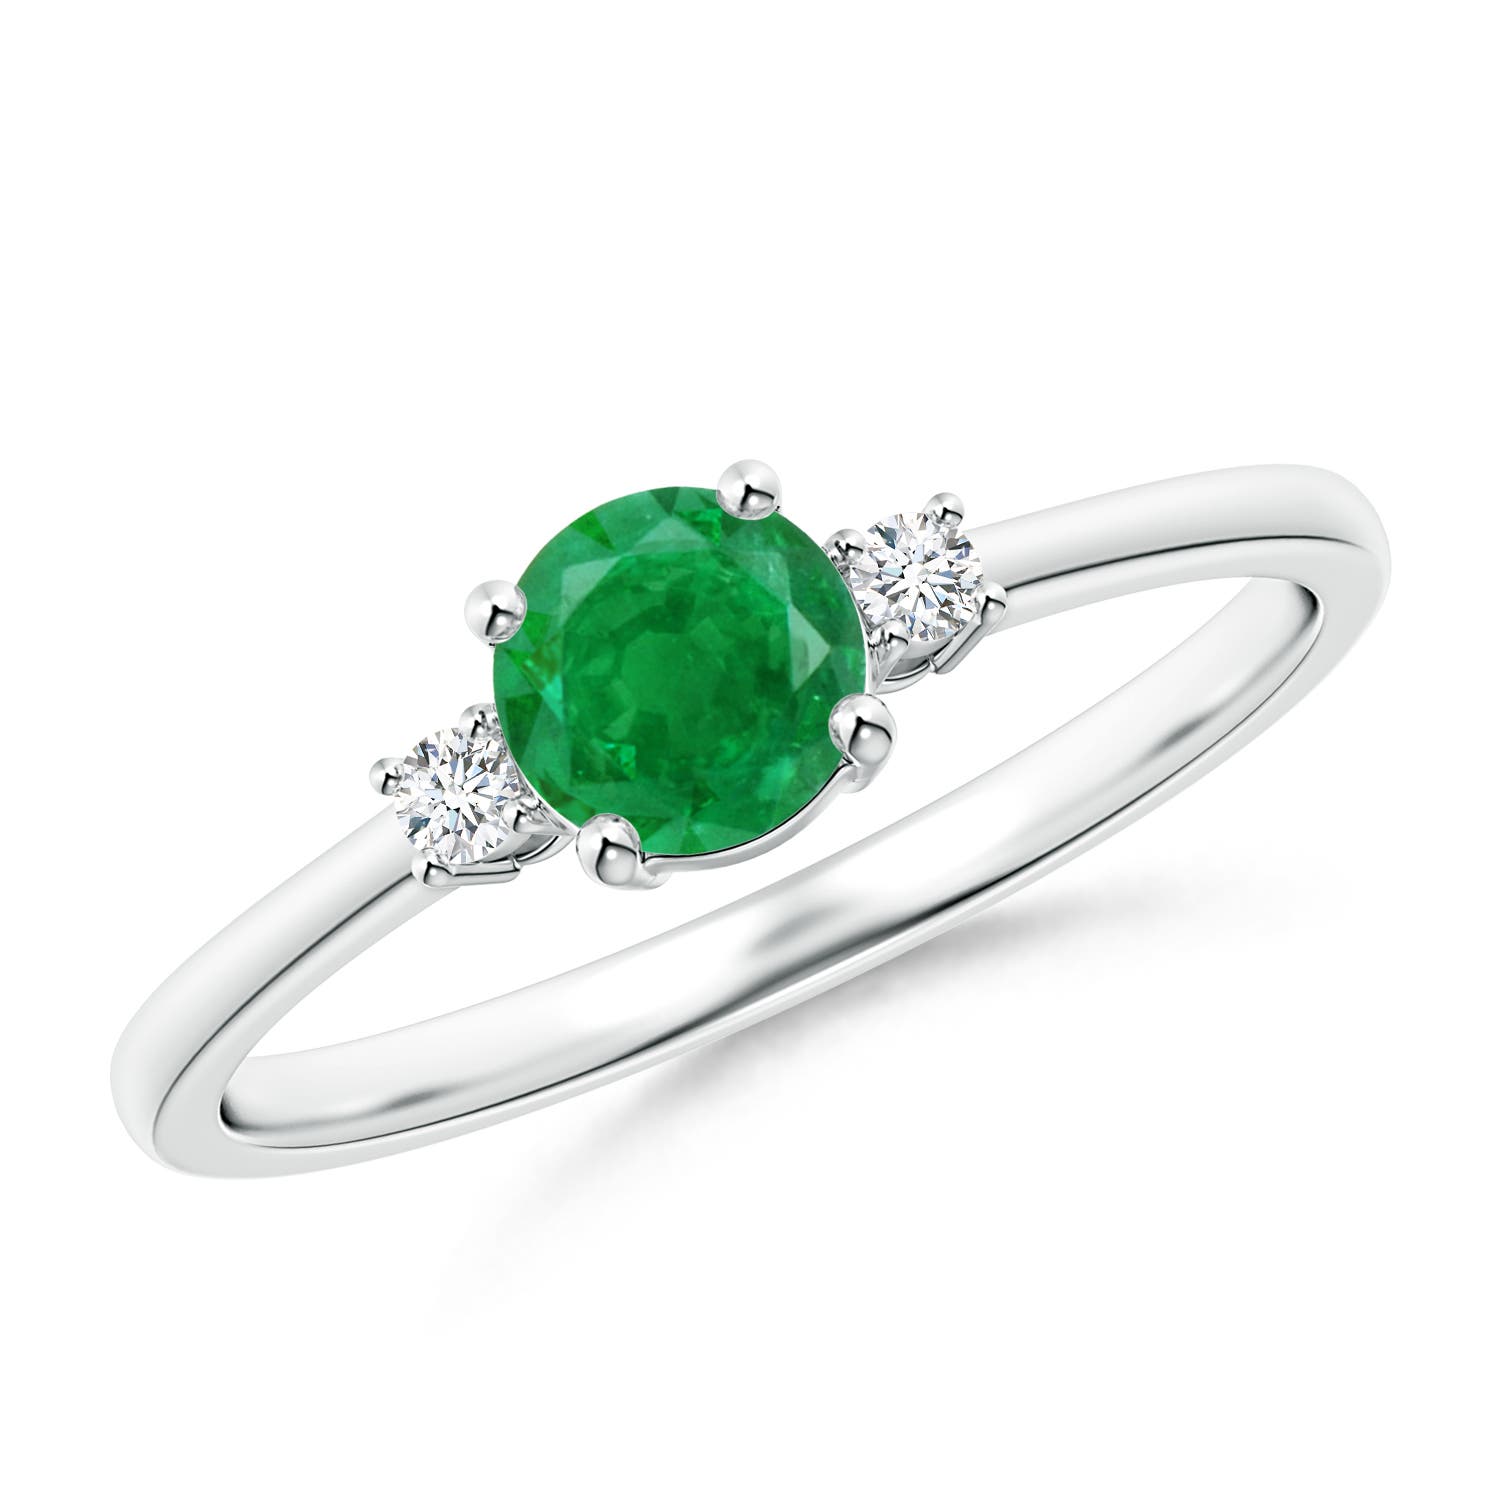 AA - Emerald / 0.51 CT / 14 KT White Gold